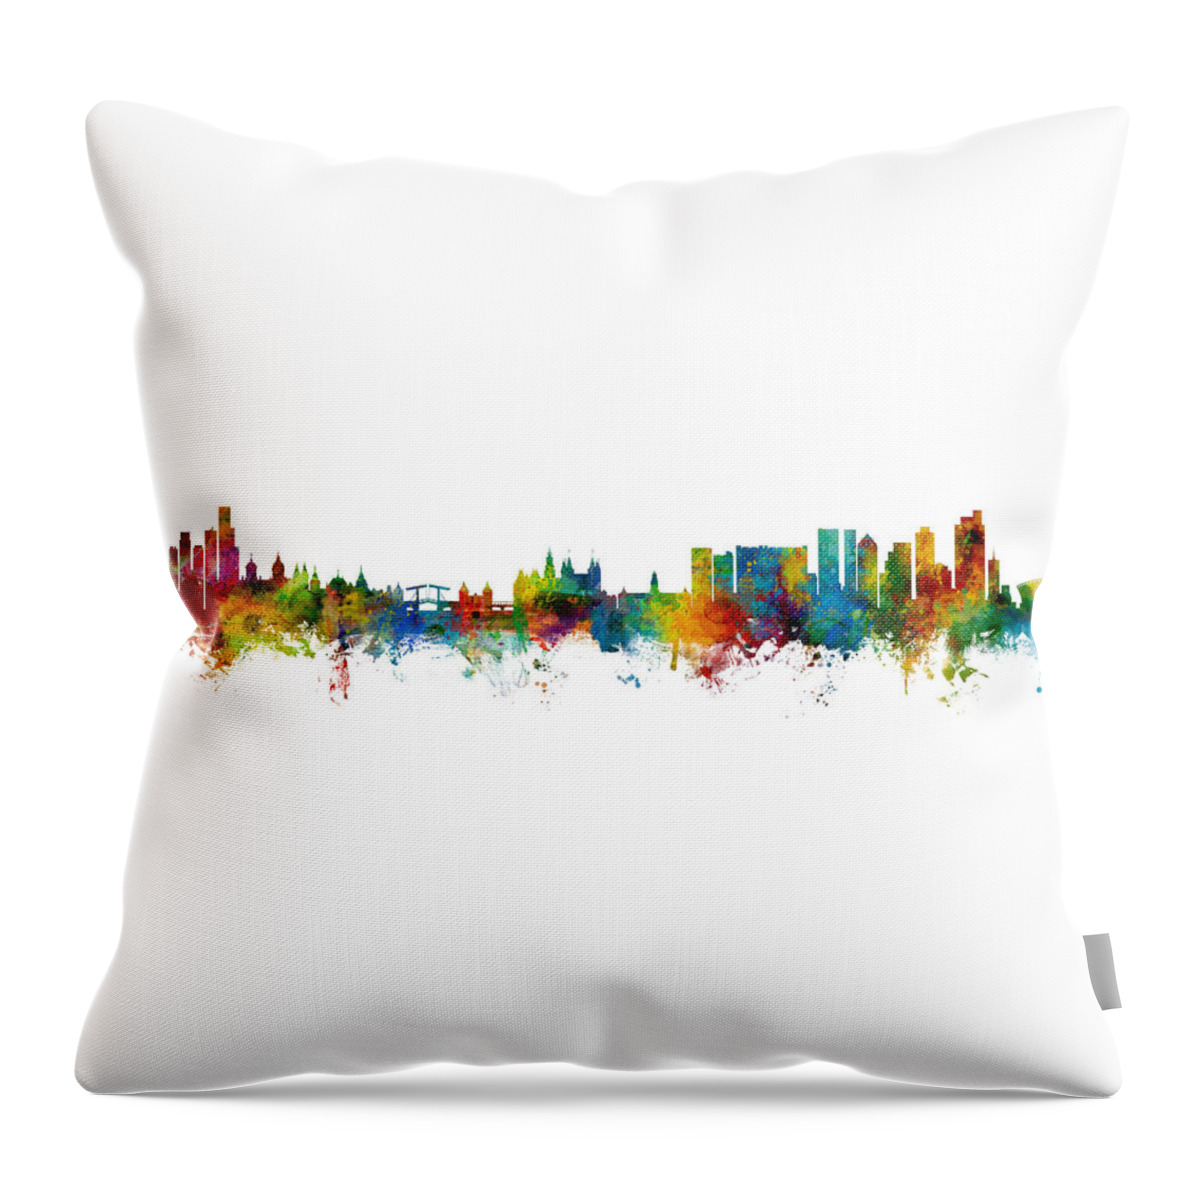 Cape Town Throw Pillow featuring the digital art Amsterdam and Cape Town Skyline Mashup by Michael Tompsett